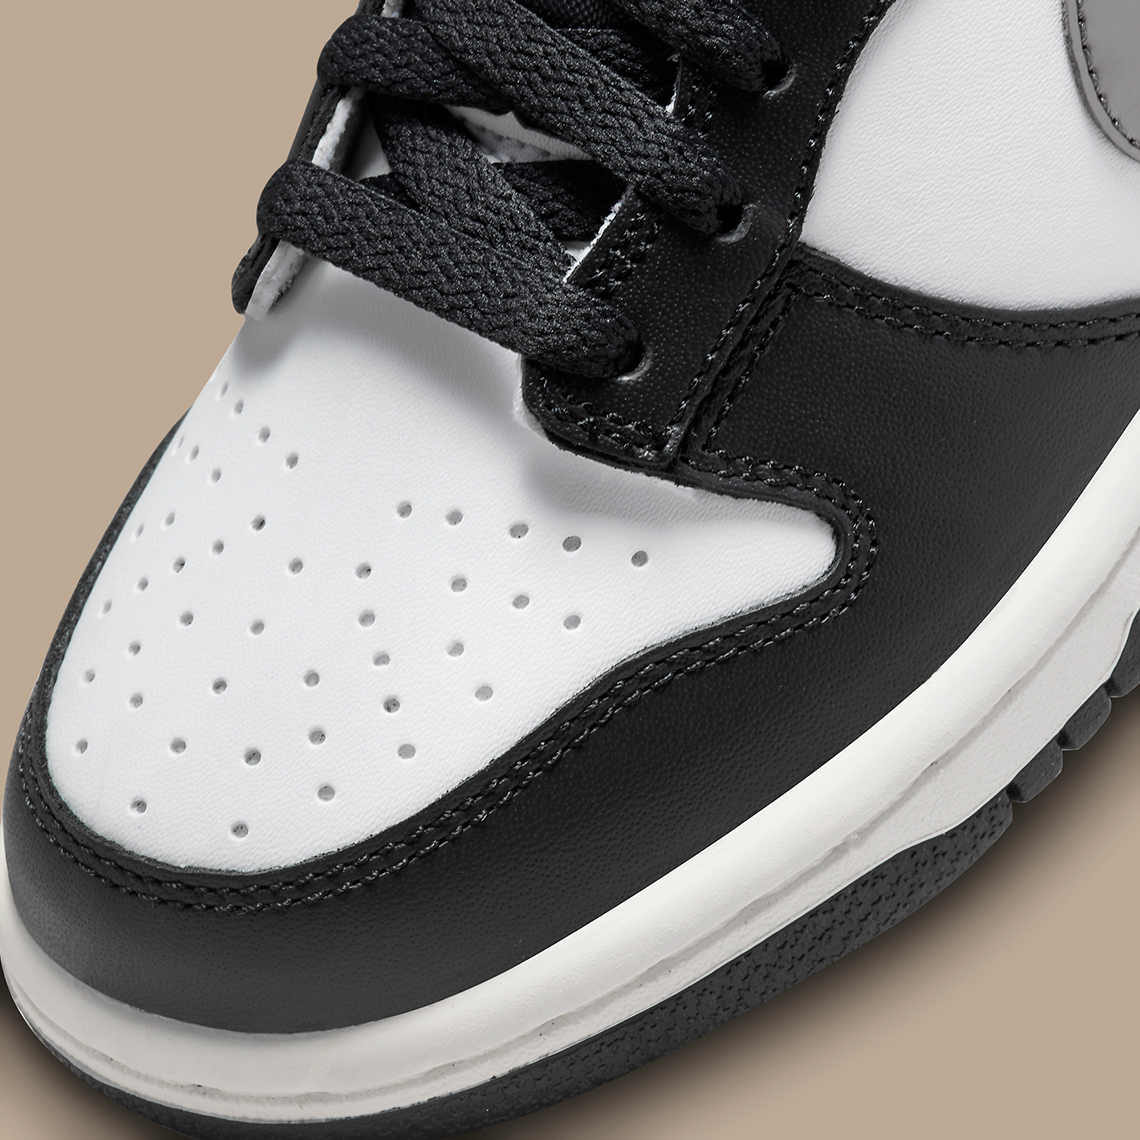 nike dunk low gs black white gold pull tabs dh9764 001 3